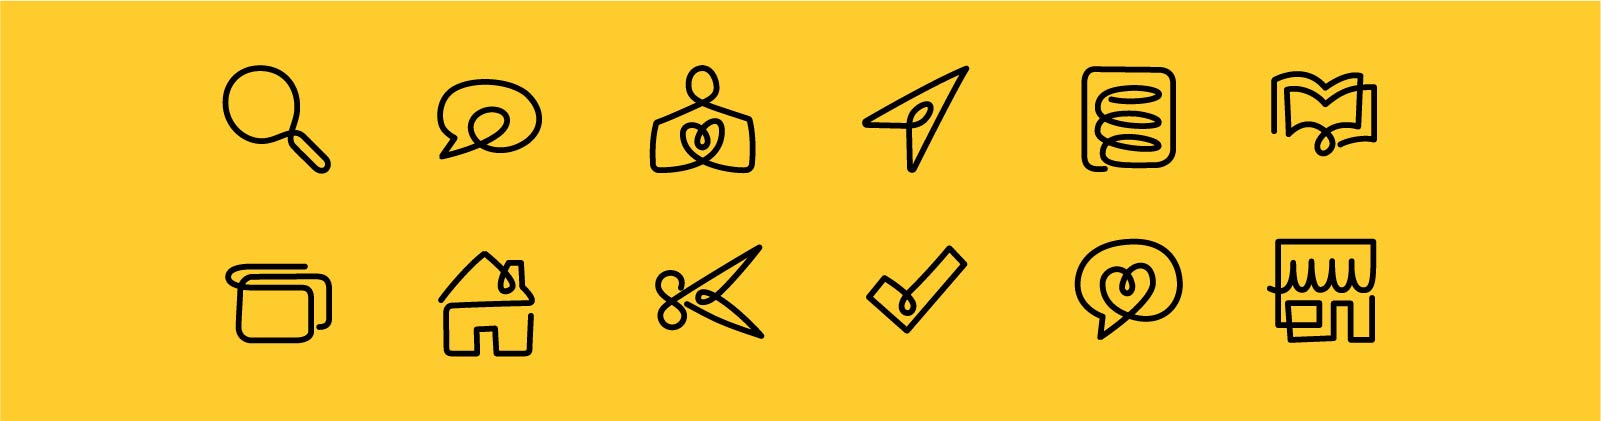 yellow pages new iconography design